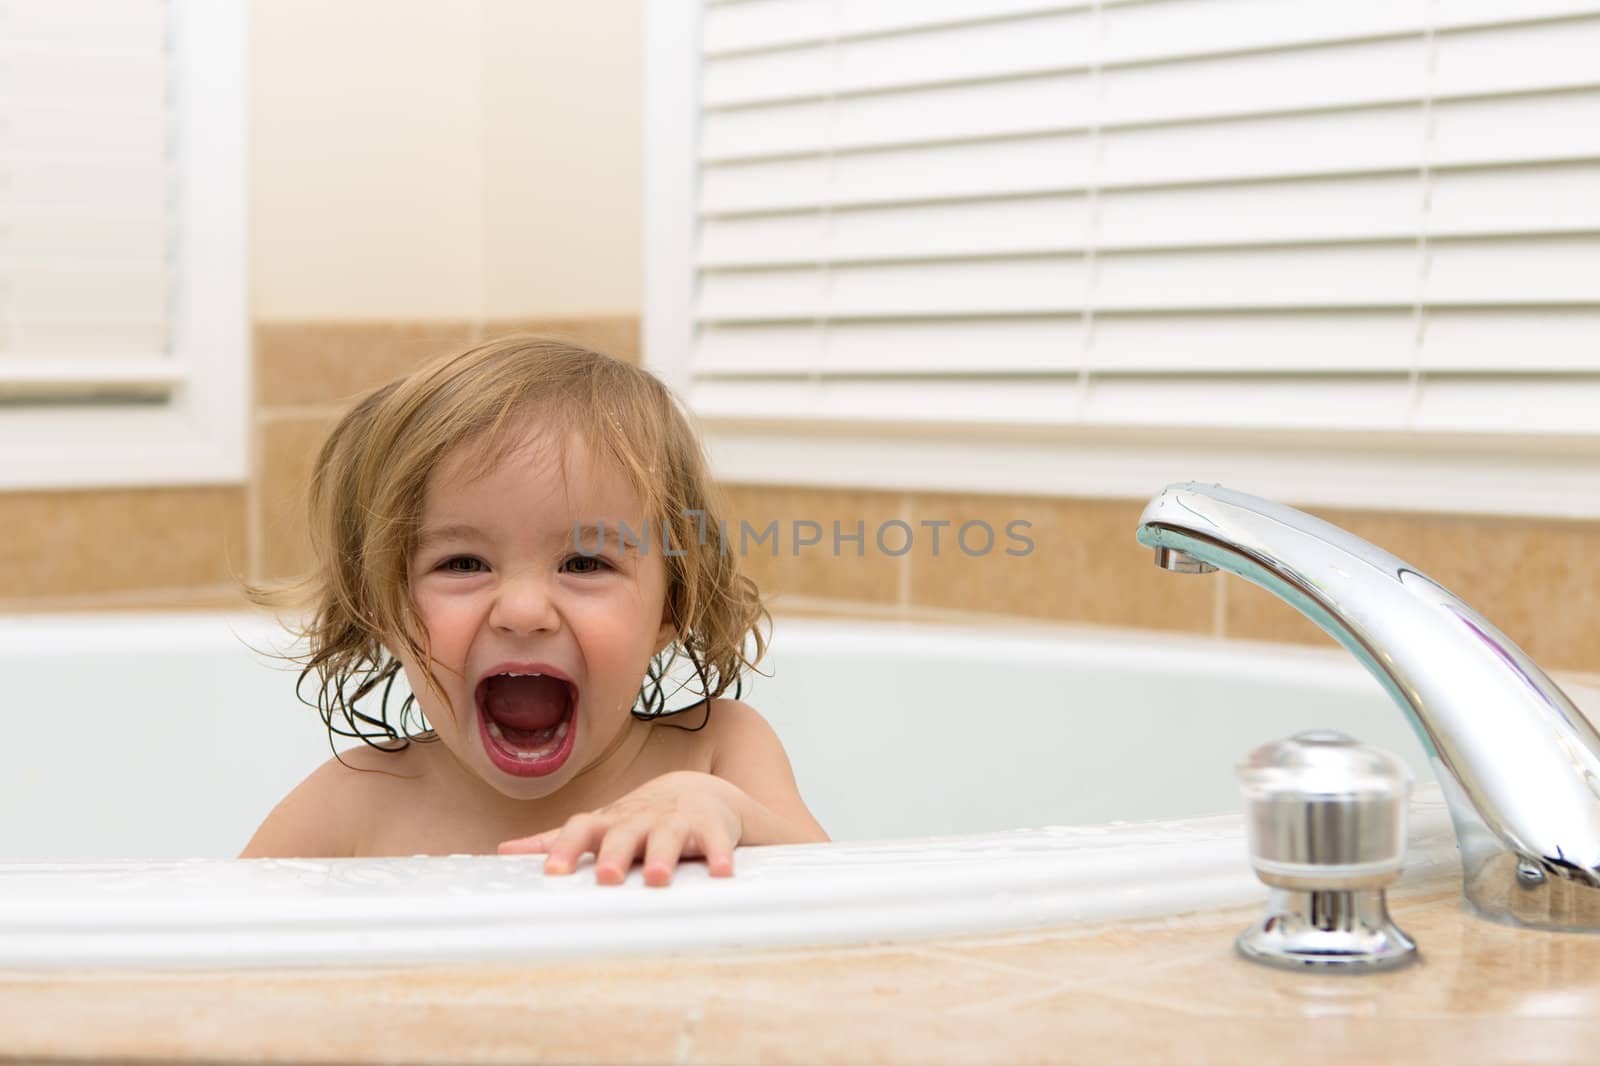 Toddler girl laughing cheerfully her moth open from bath tub. Teething